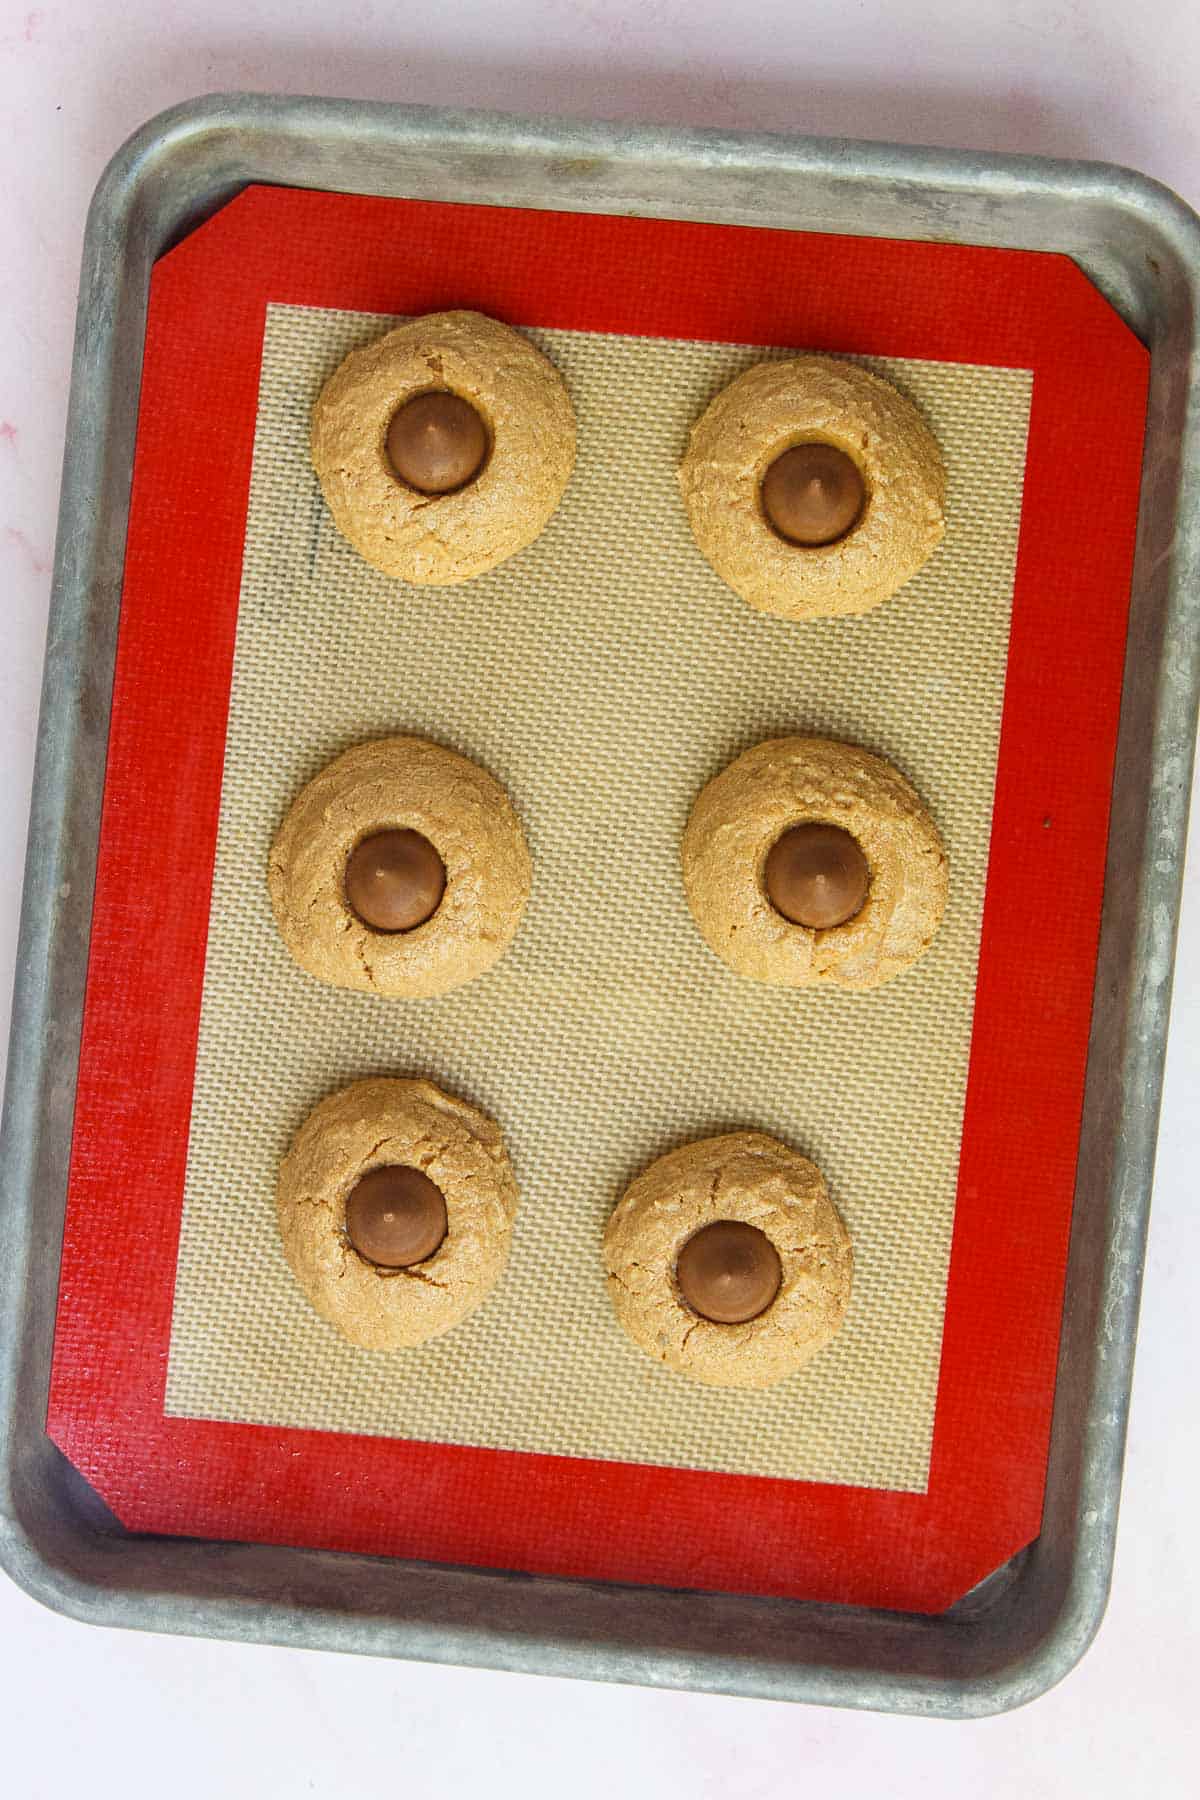 Baked peanut butter cookies with a Hershey Kiss pressed into the center of each cookie